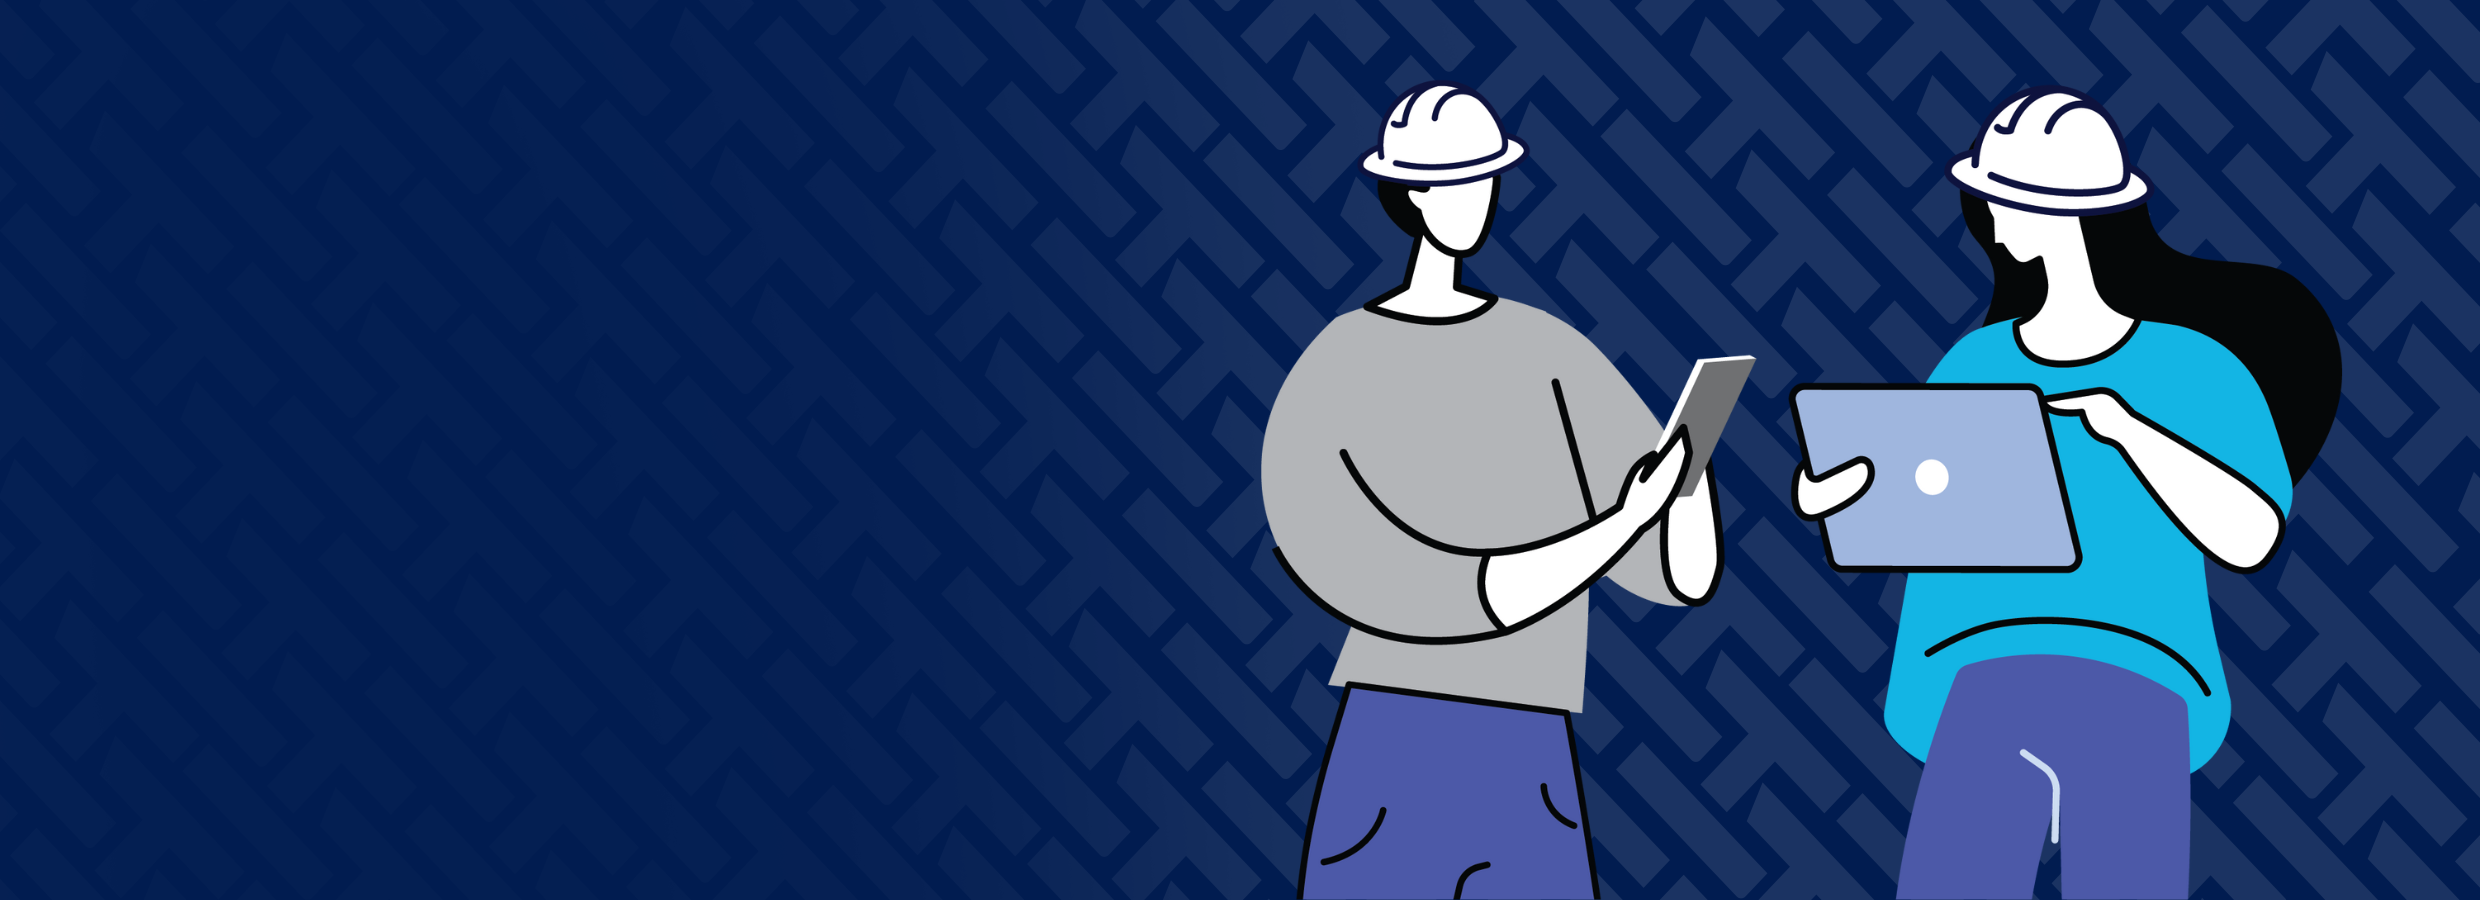 Image has a dark blue background with HammerTech logo embedded.  Image is a drawing of a man with a cell phone and a woman with a tablet.  They are working on a JHA together.